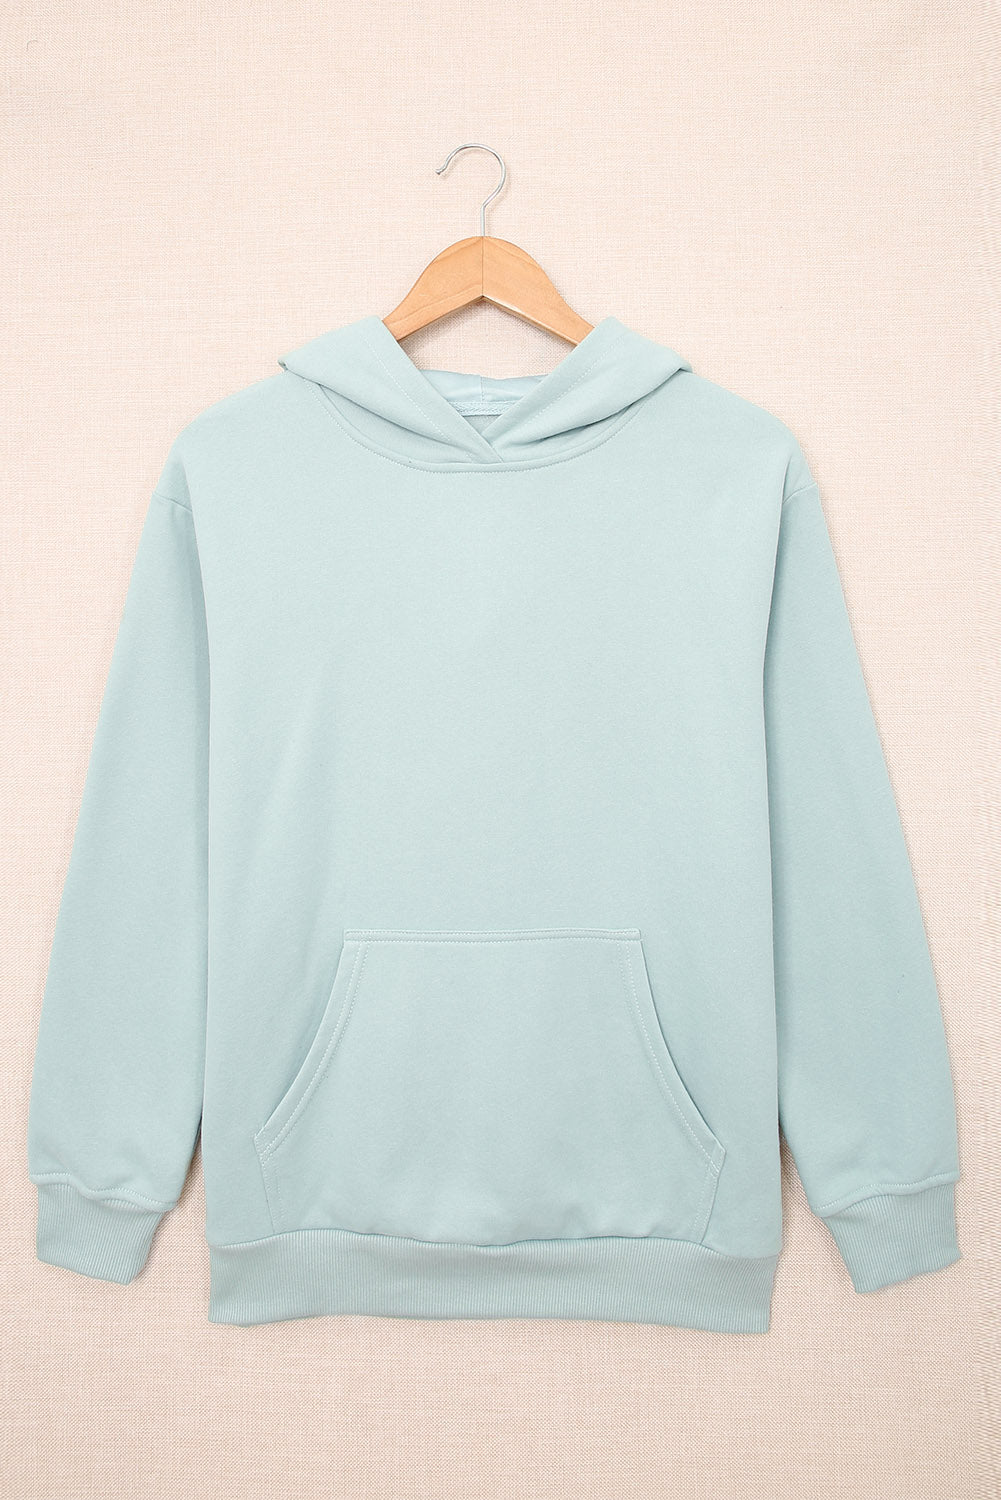 Dropped Shoulder Kangaroo Pocket Hoodie - Blue / S - Women’s Clothing & Accessories - Shirts & Tops - 14 - 2024